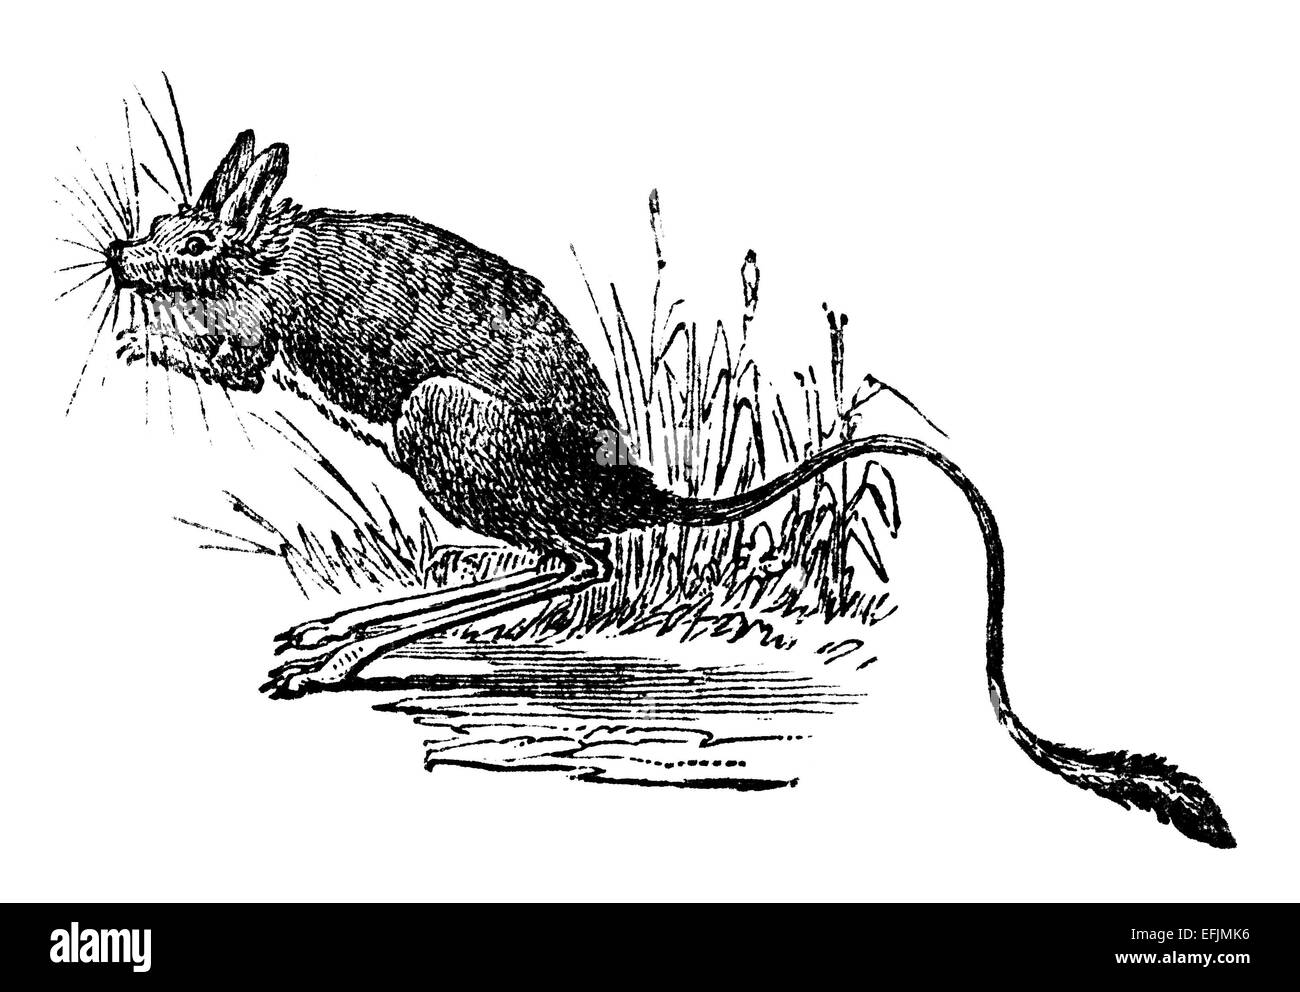 Victorian engraving of a jerboa. Digitally restored image from a mid-19th century Encyclopaedia. Stock Photo